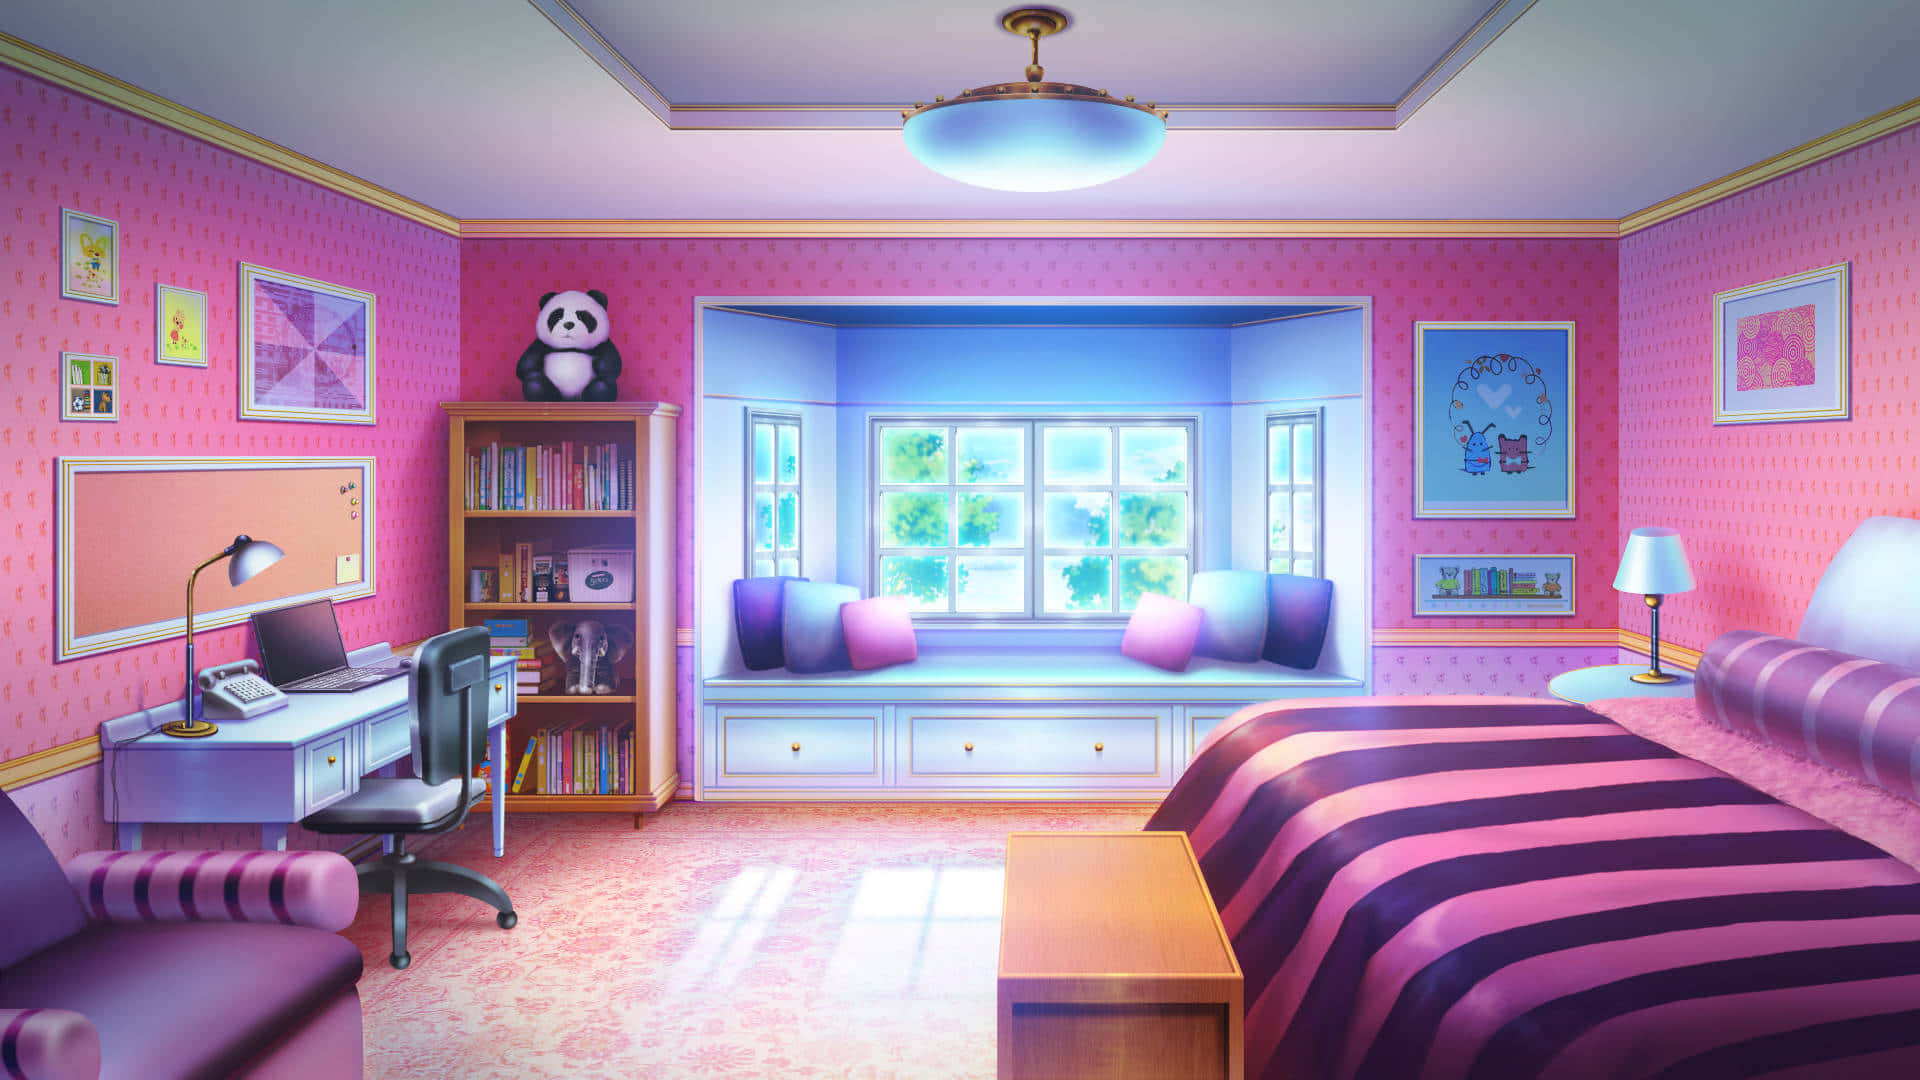 A Cute Anime Bedroom, Full of Colorful Personality